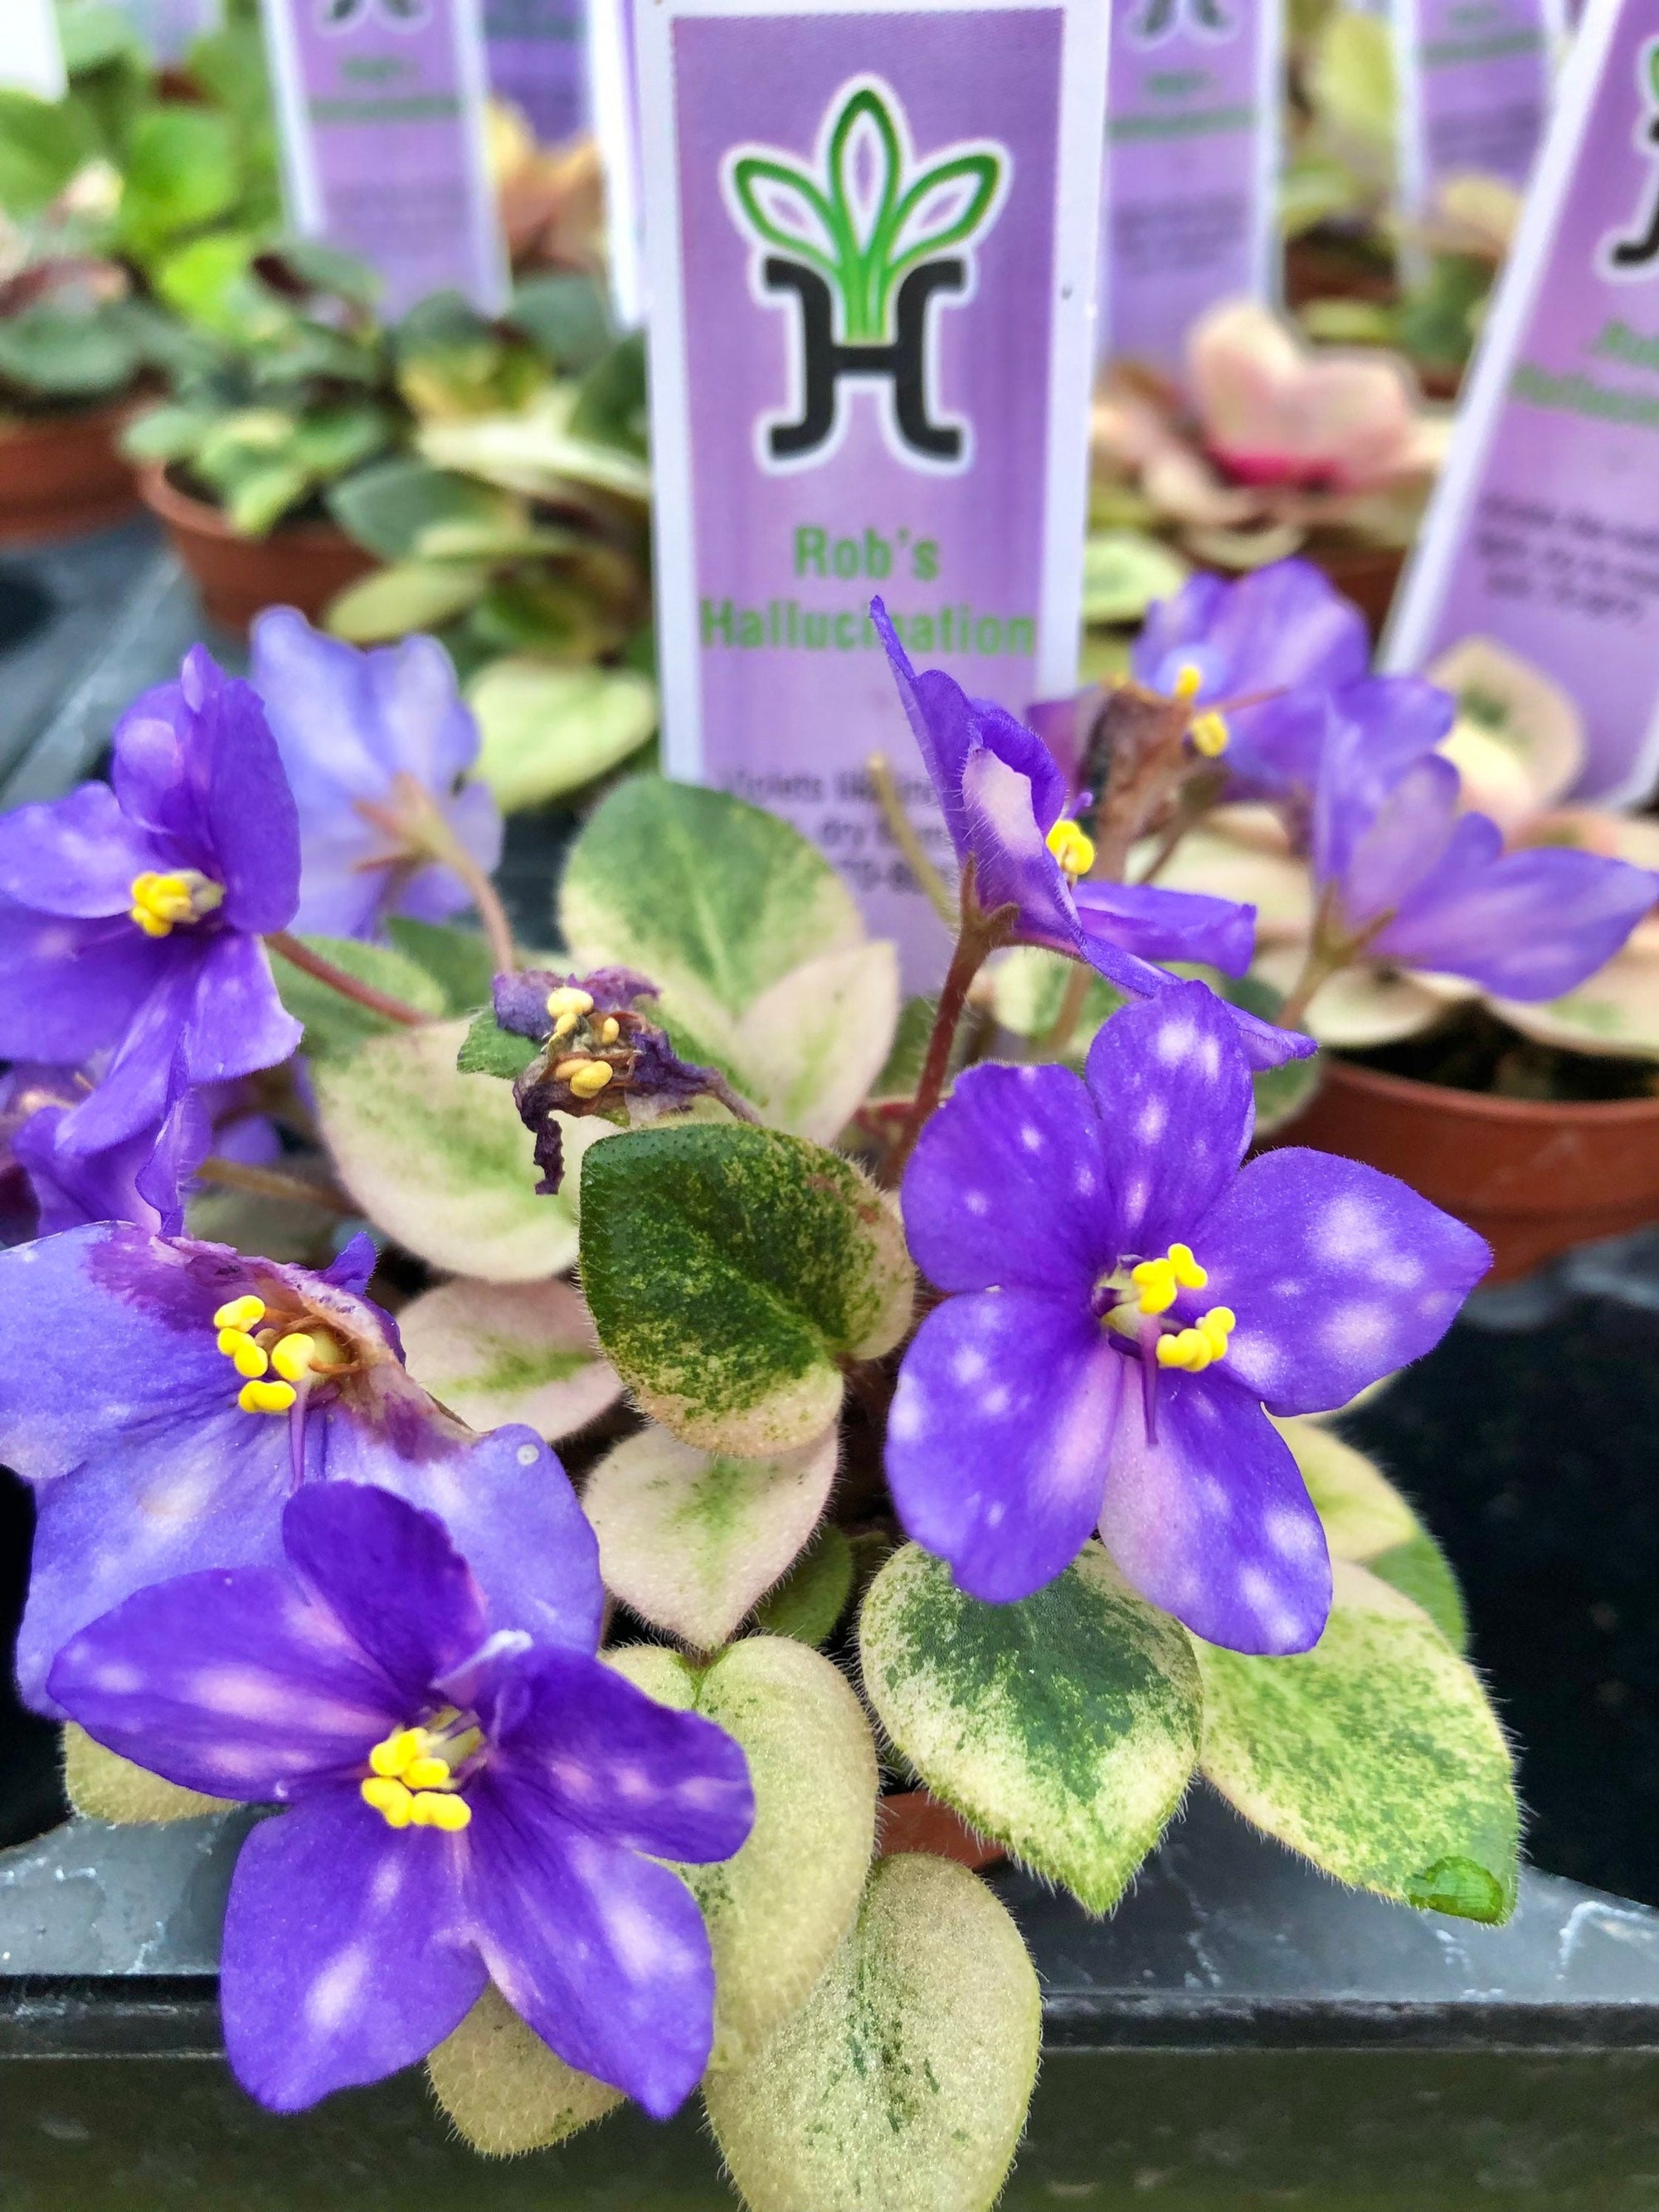 Miniature African Violet Variegated Harmony’s ‘Rob’s Hallucination’ 2” Potted house plant flower gift pixie mini